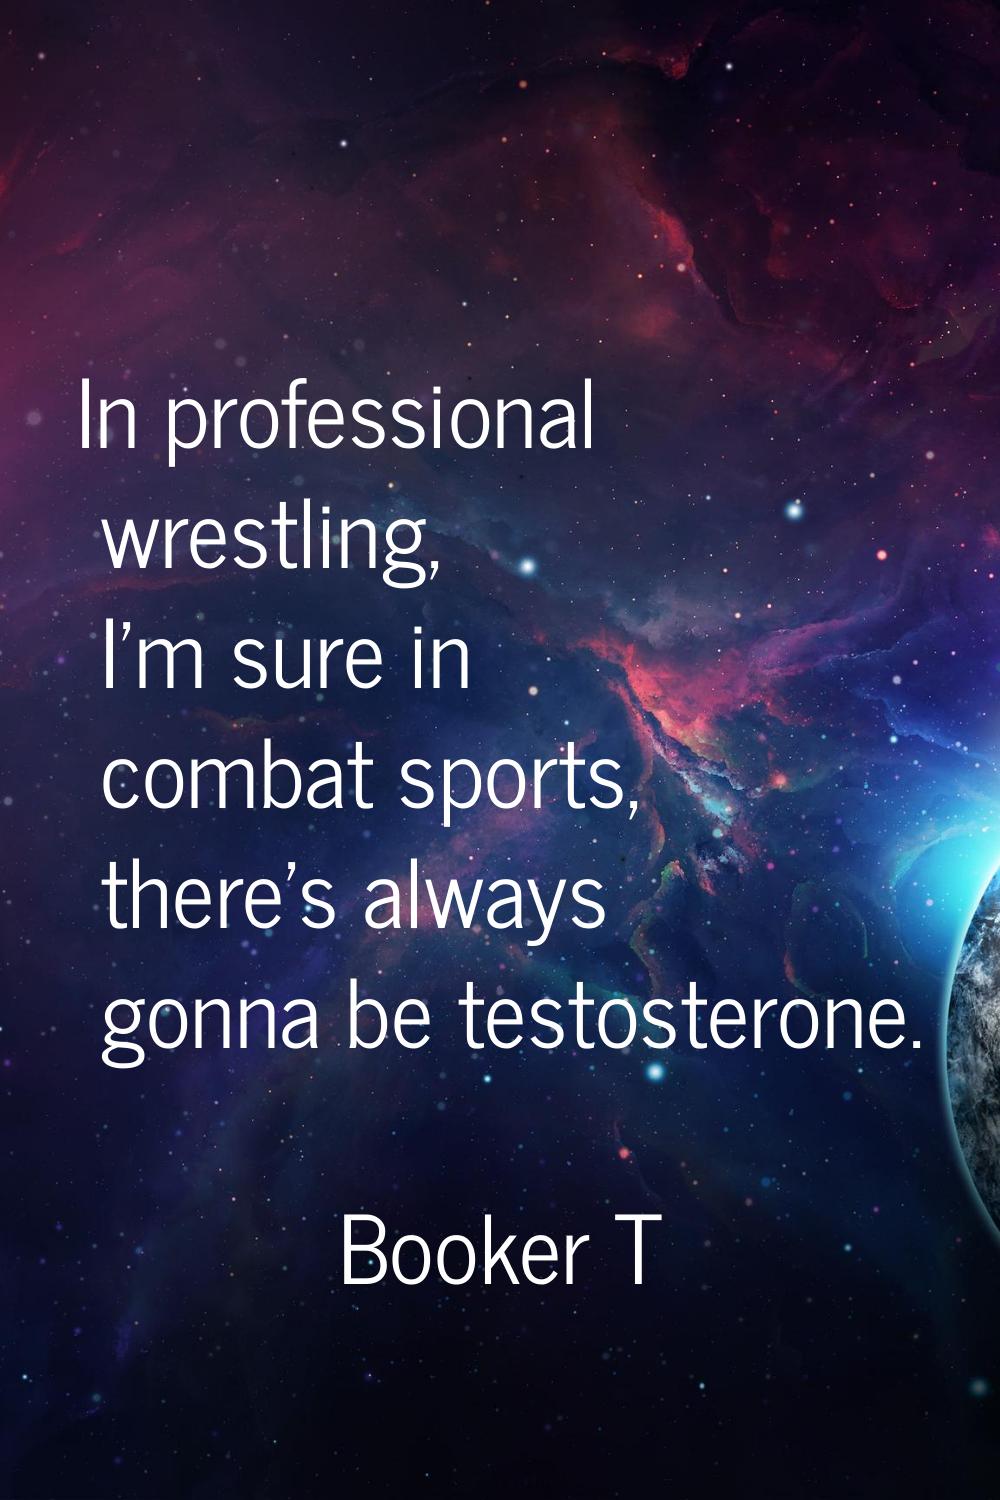 In professional wrestling, I'm sure in combat sports, there's always gonna be testosterone.